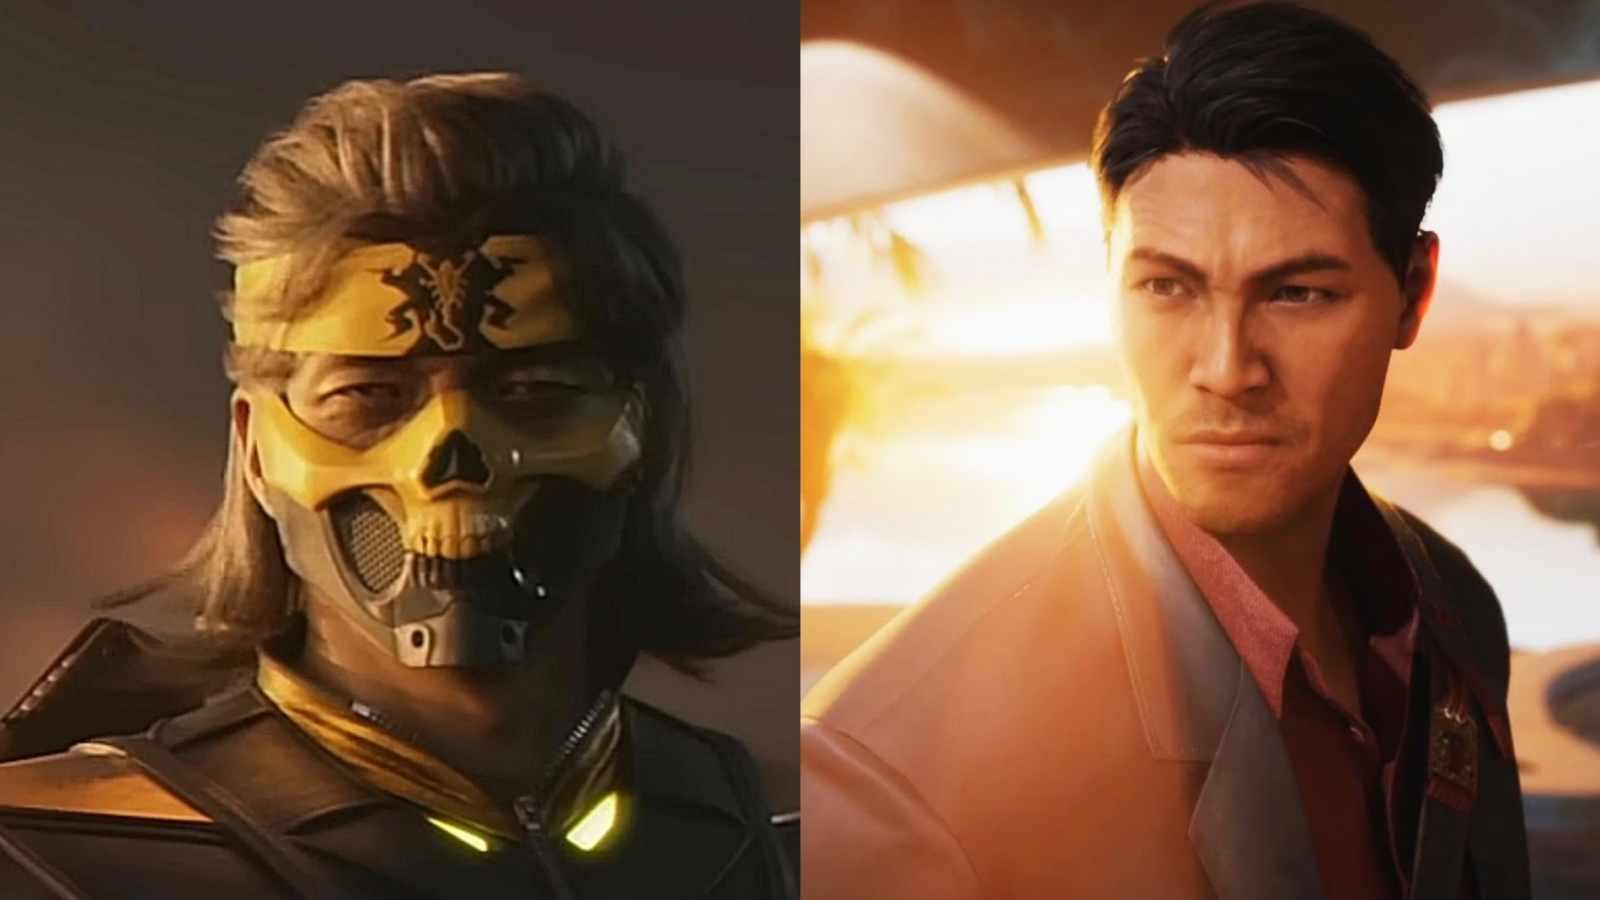 Mortal Kombat 11 DLC characters reportedly leaked